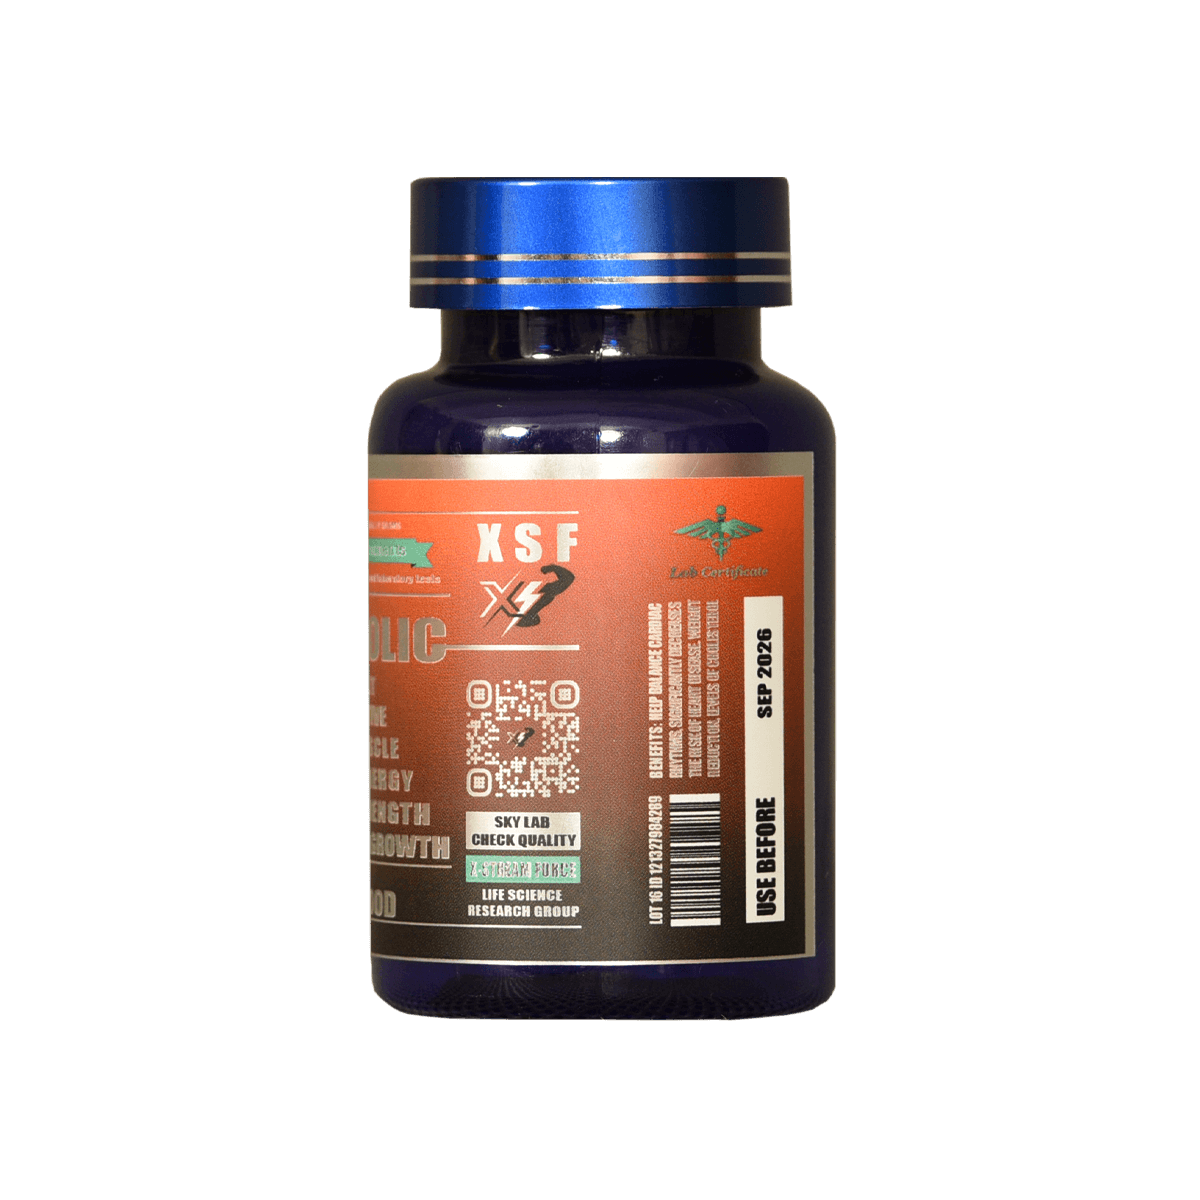 stenabolic-sr9009-capsules-60-10mg-muscle shop-xstreamforce-for recomp-fat cleaner-muscle builder-stamina✦sr9009 sarms✦ fitness supplements-muscle-hunter